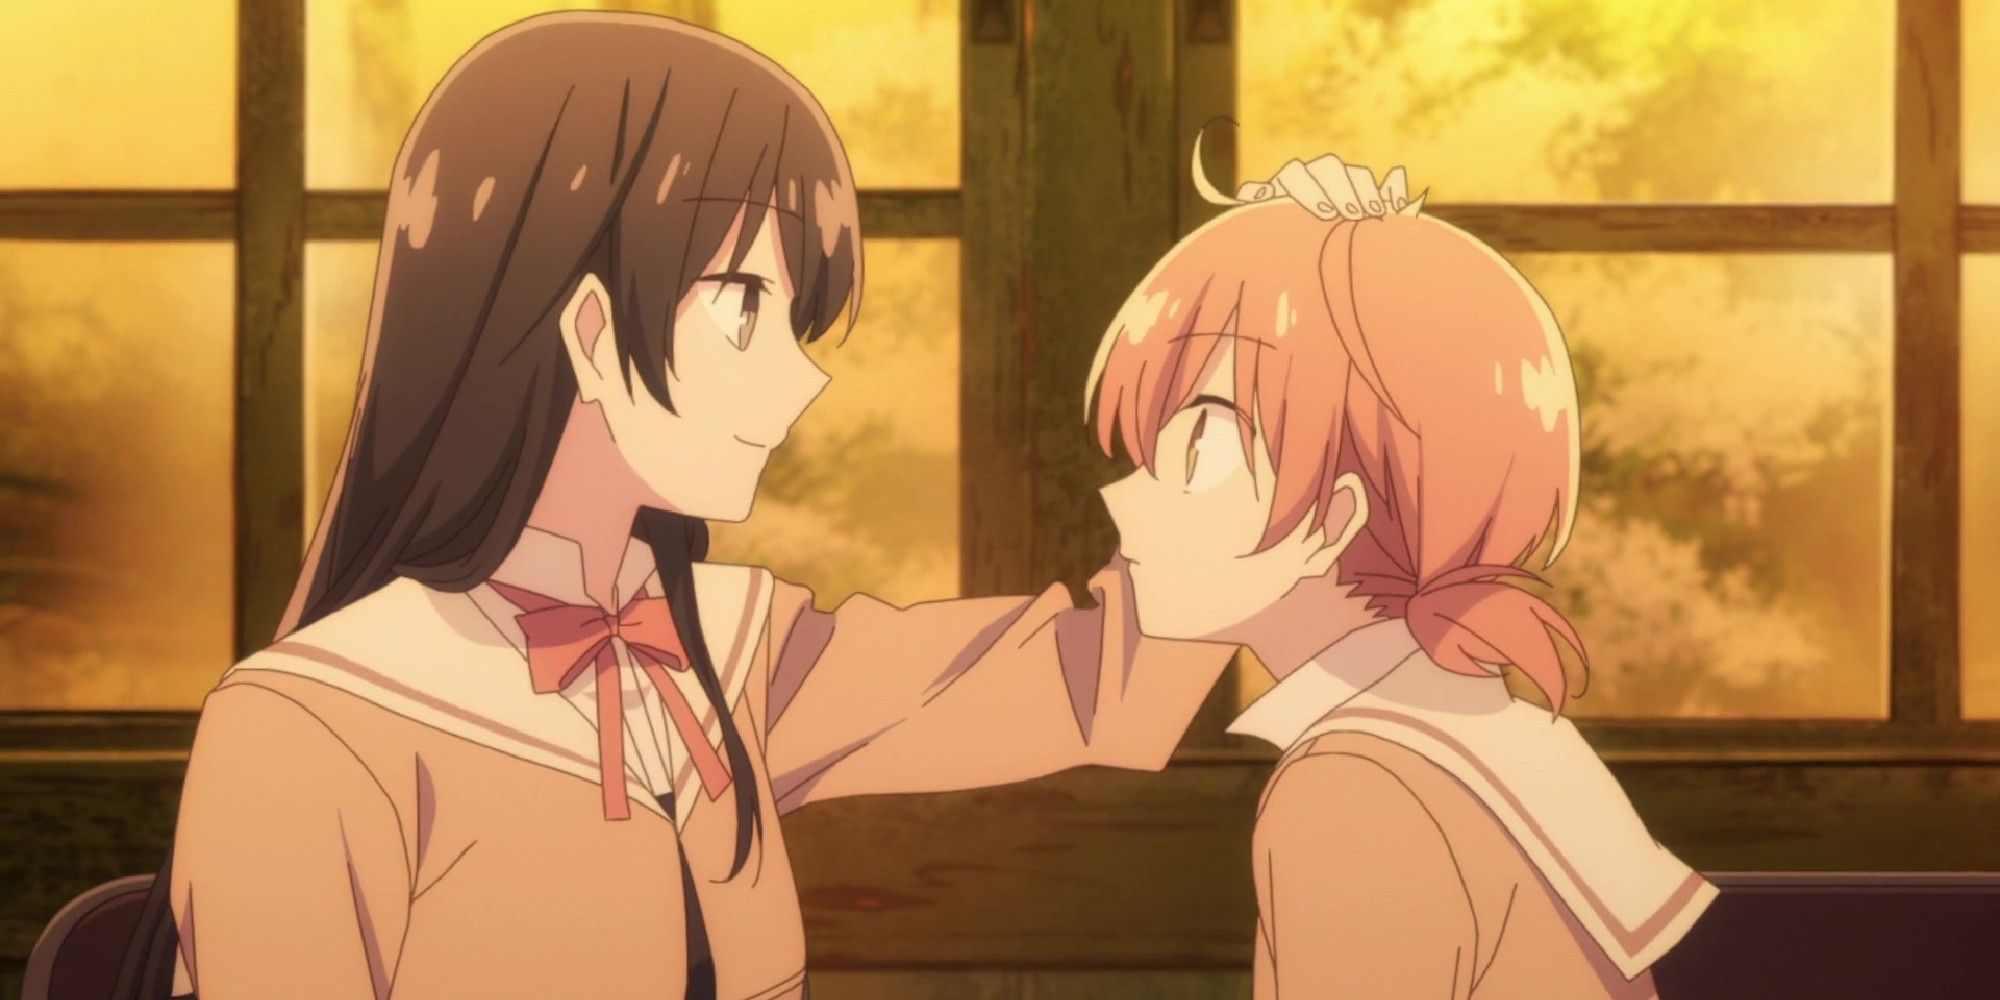 Yuu and Touko from Bloom Into You